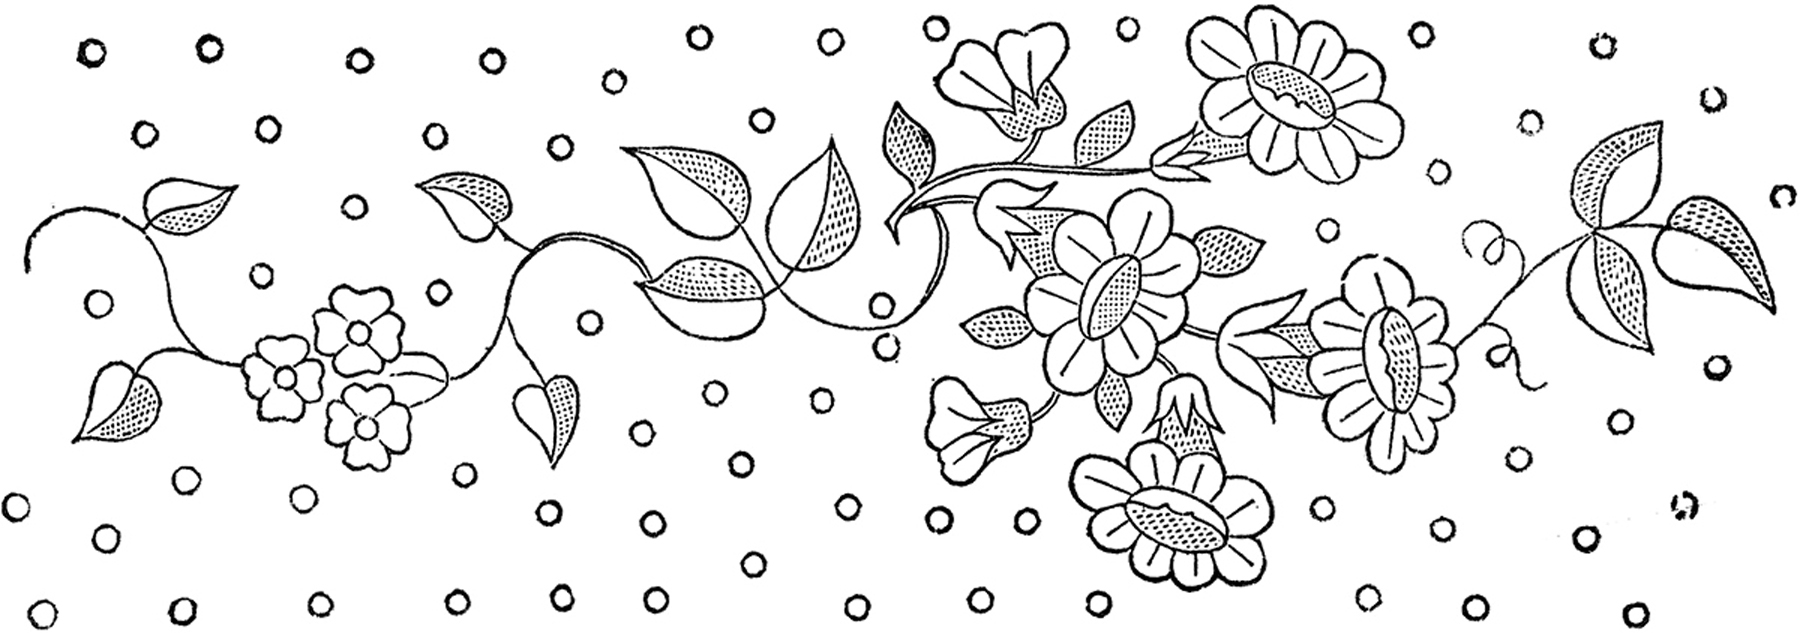 Paper Embroidery Patterns Free Floral Embroidery Patterns Pretty The Graphics Fairy